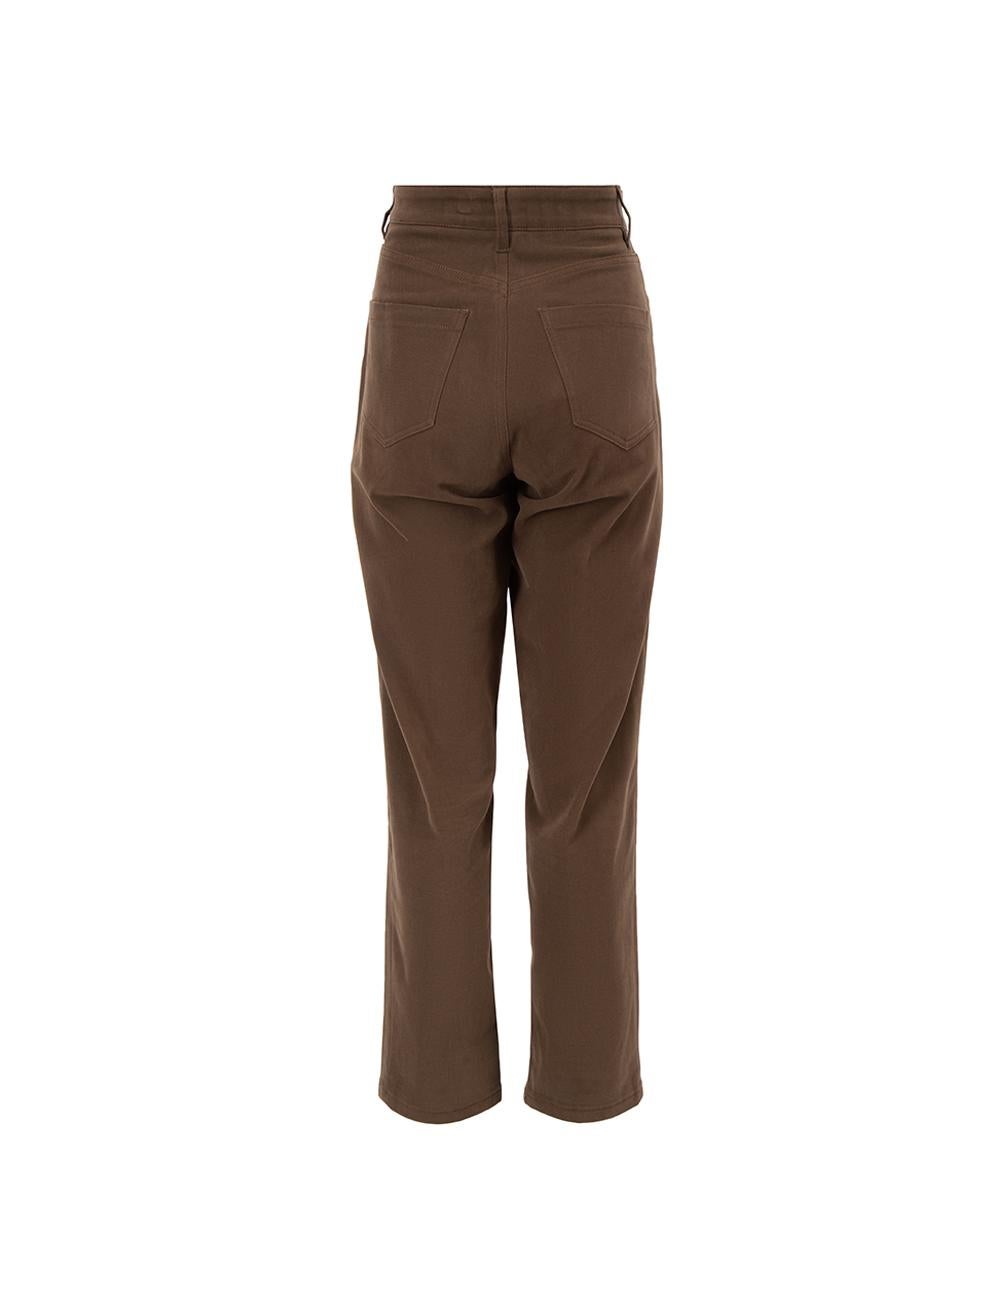 Sanne Women's Brown Straight Leg Trousers In Good Condition For Sale In London, GB